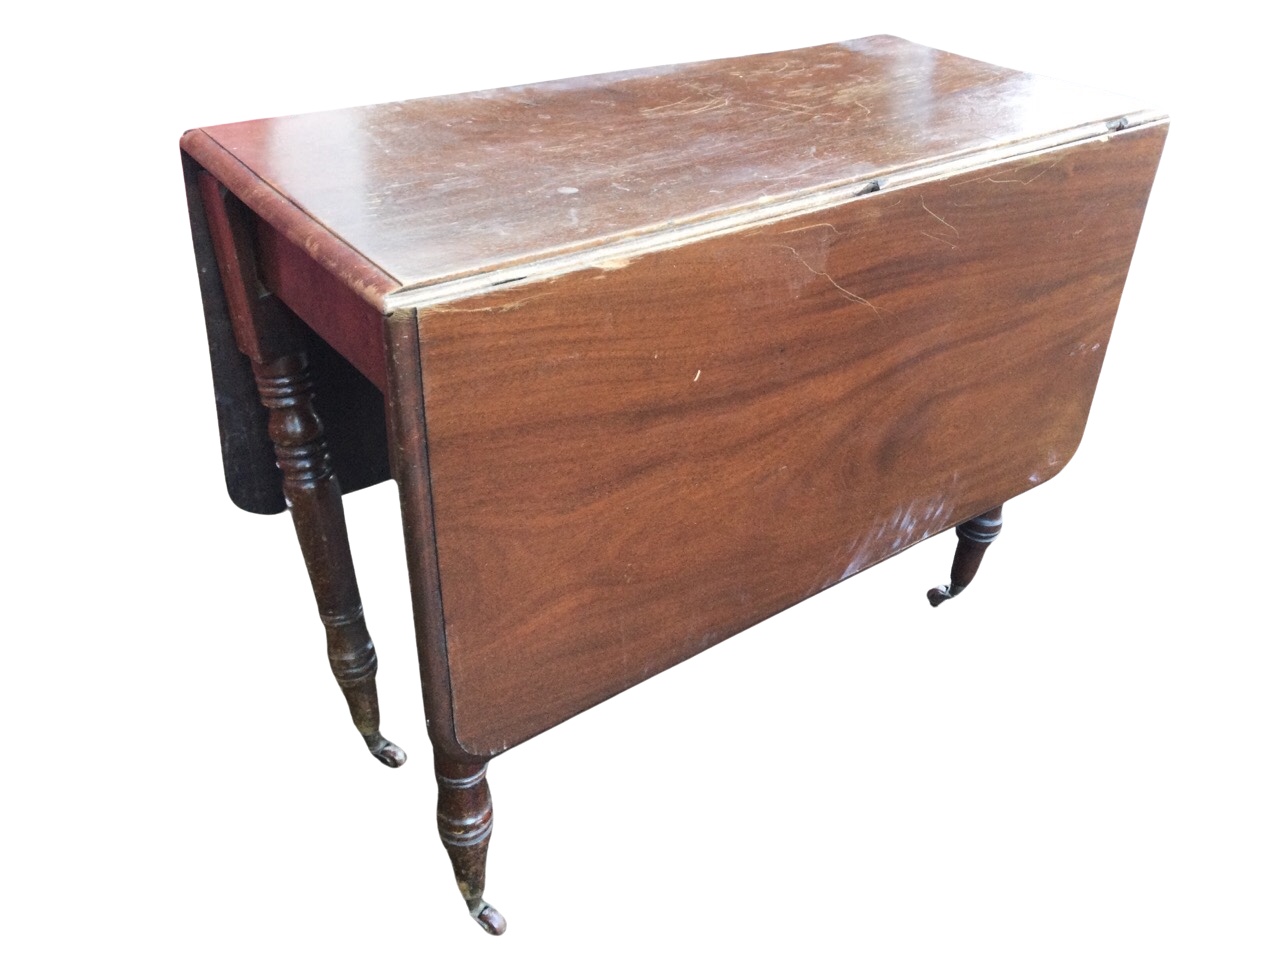 A Victorian mahogany drop leaf dining table, the moulded rectangular top with two leaves opening